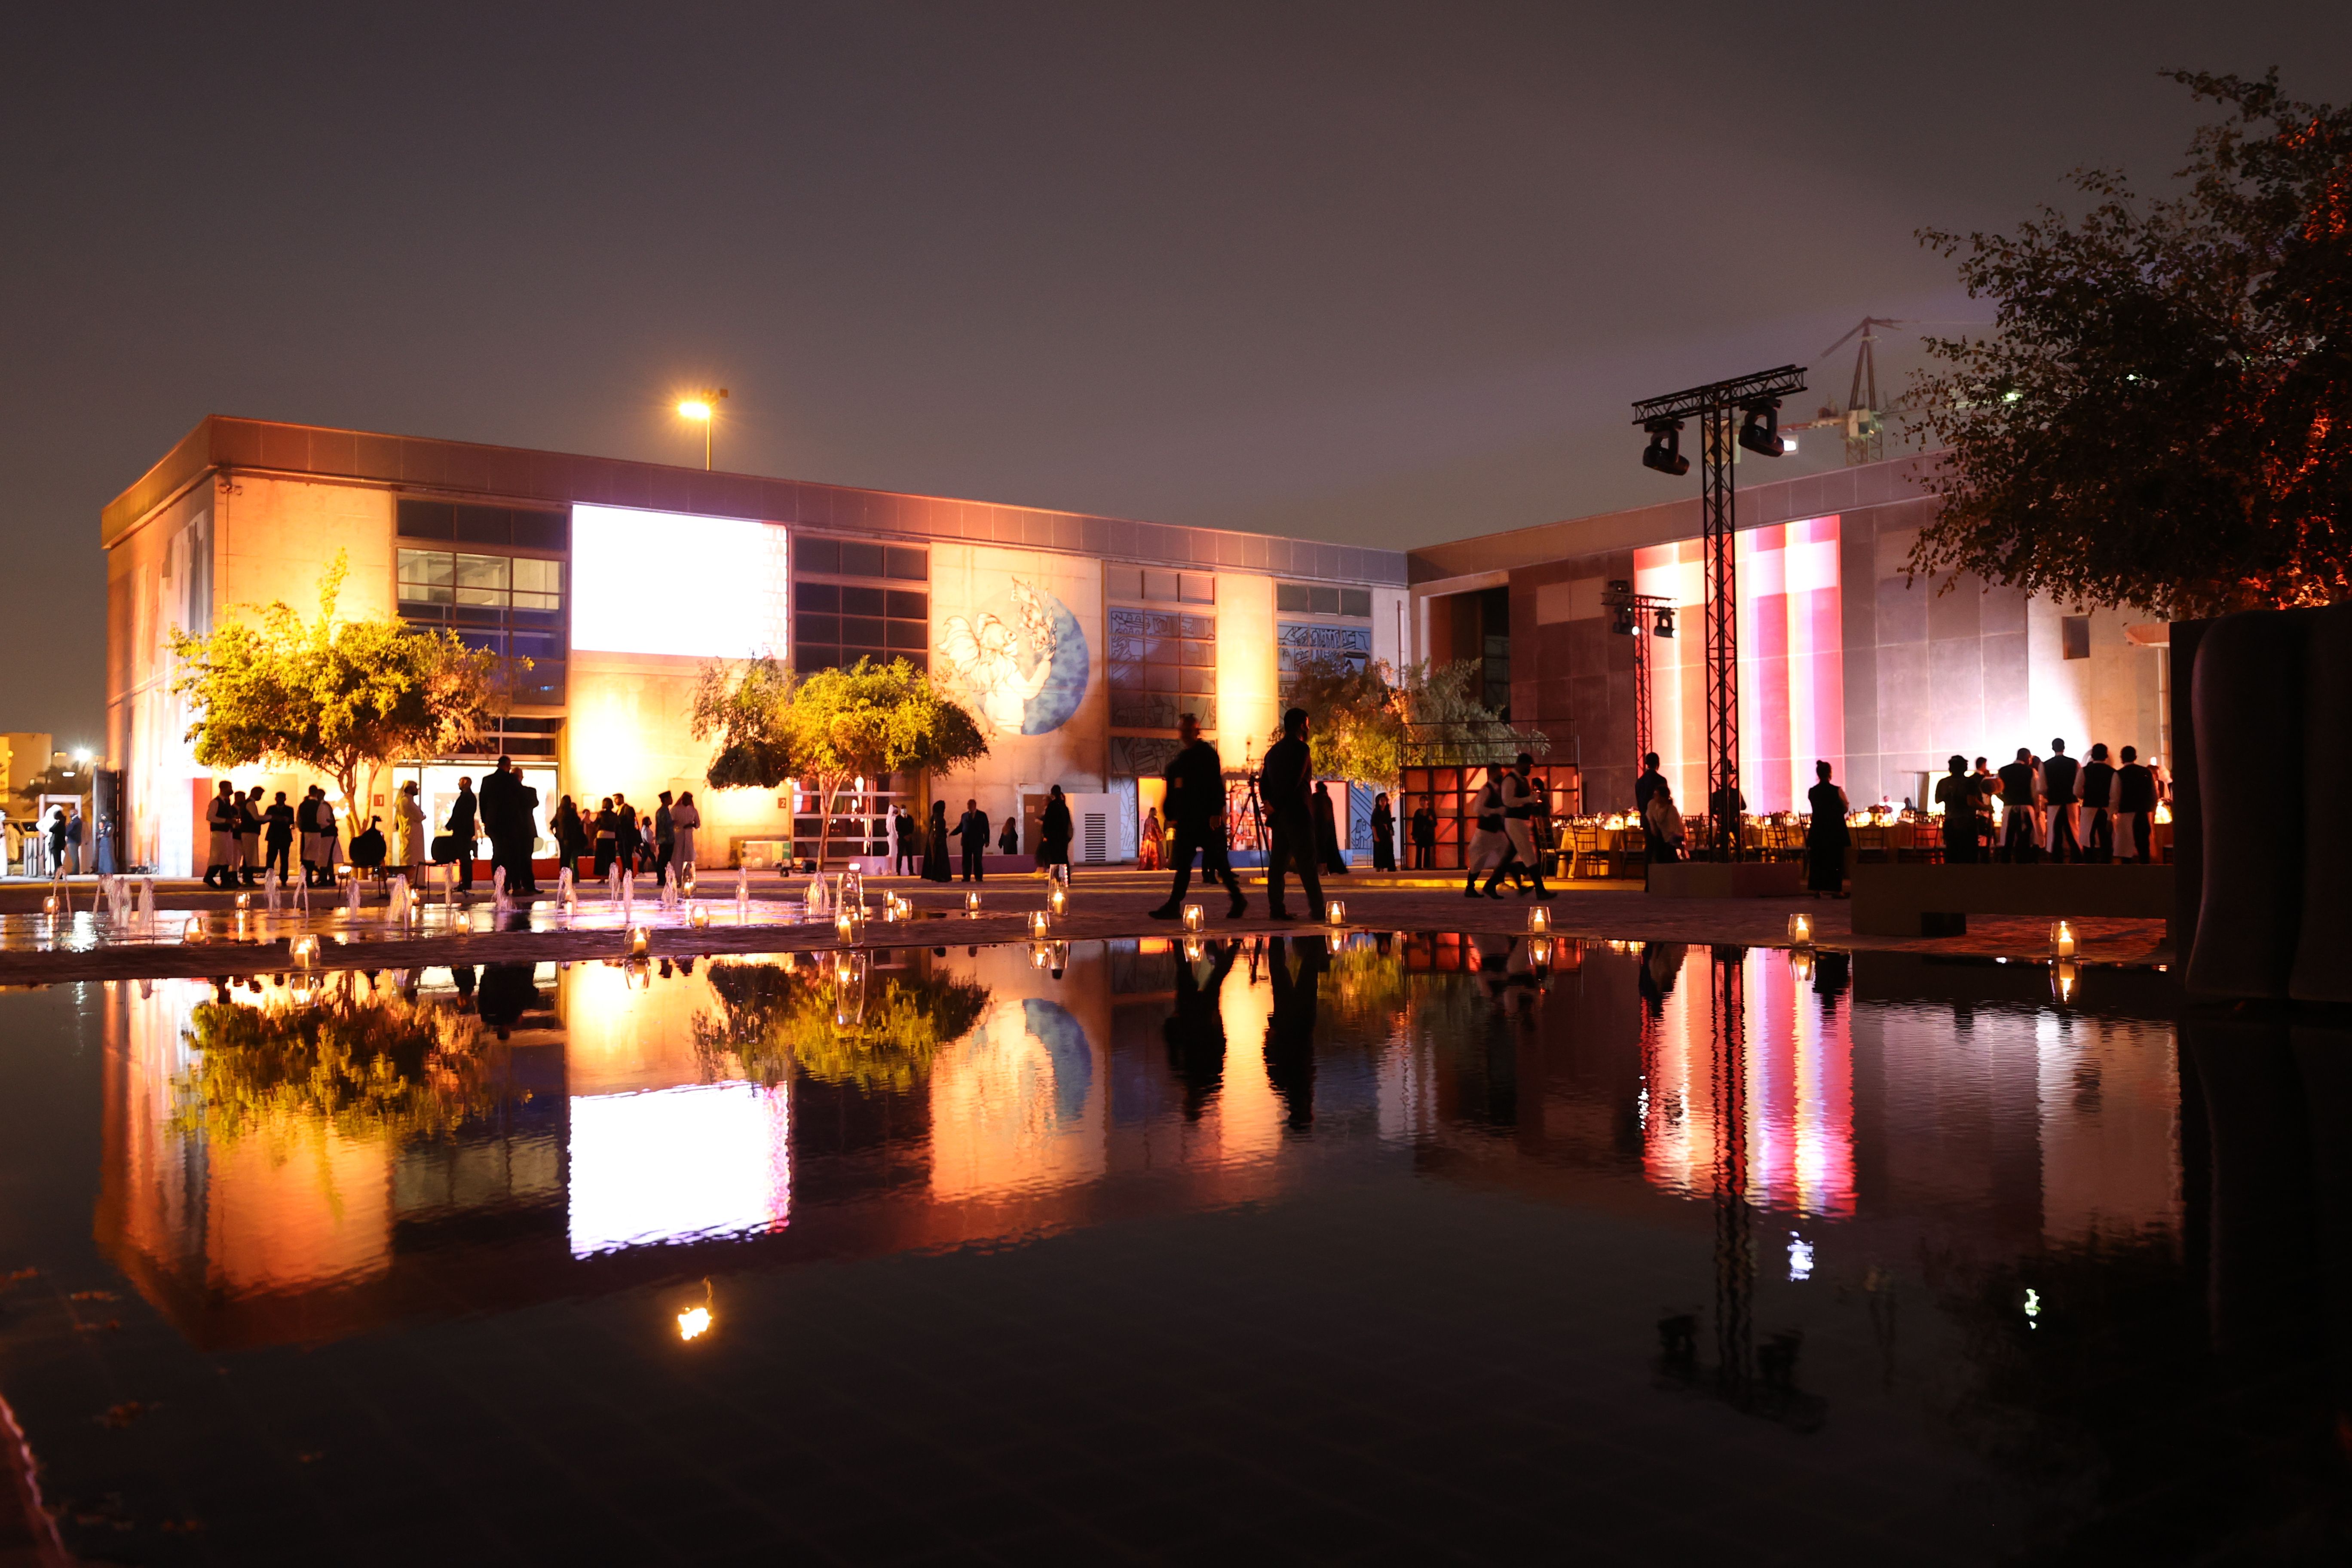 The Fire Station courtyard at night, lit in soft orange and pink lights for guests of the Years of Culture opening ceremony.